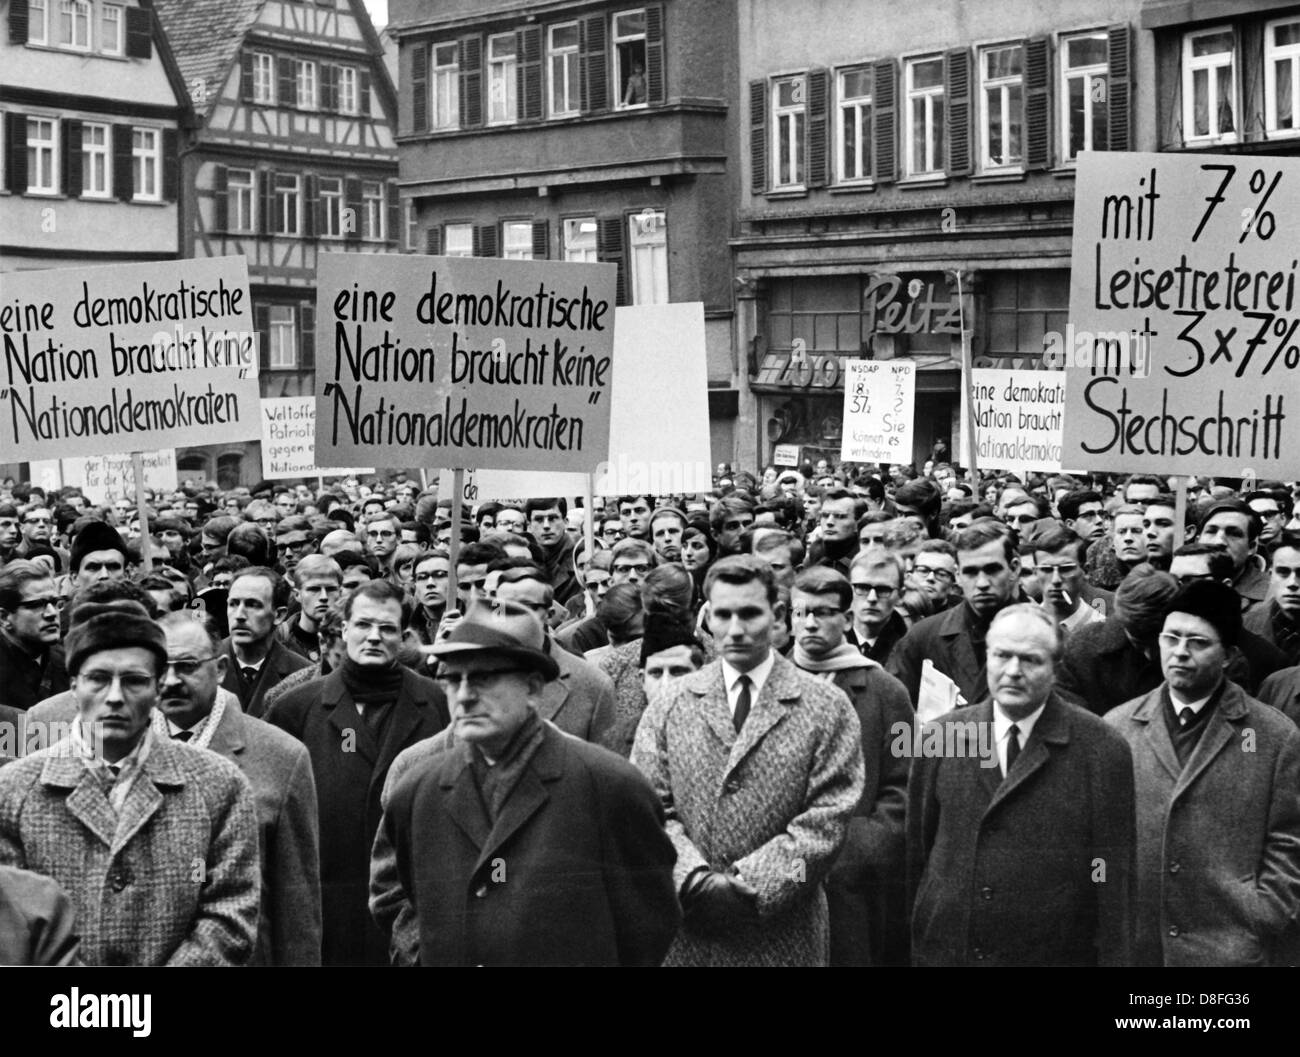 Demonstrators with banners protest against right-wing radicalism in Tuebingen on the 7th of December in 1966. Stock Photo